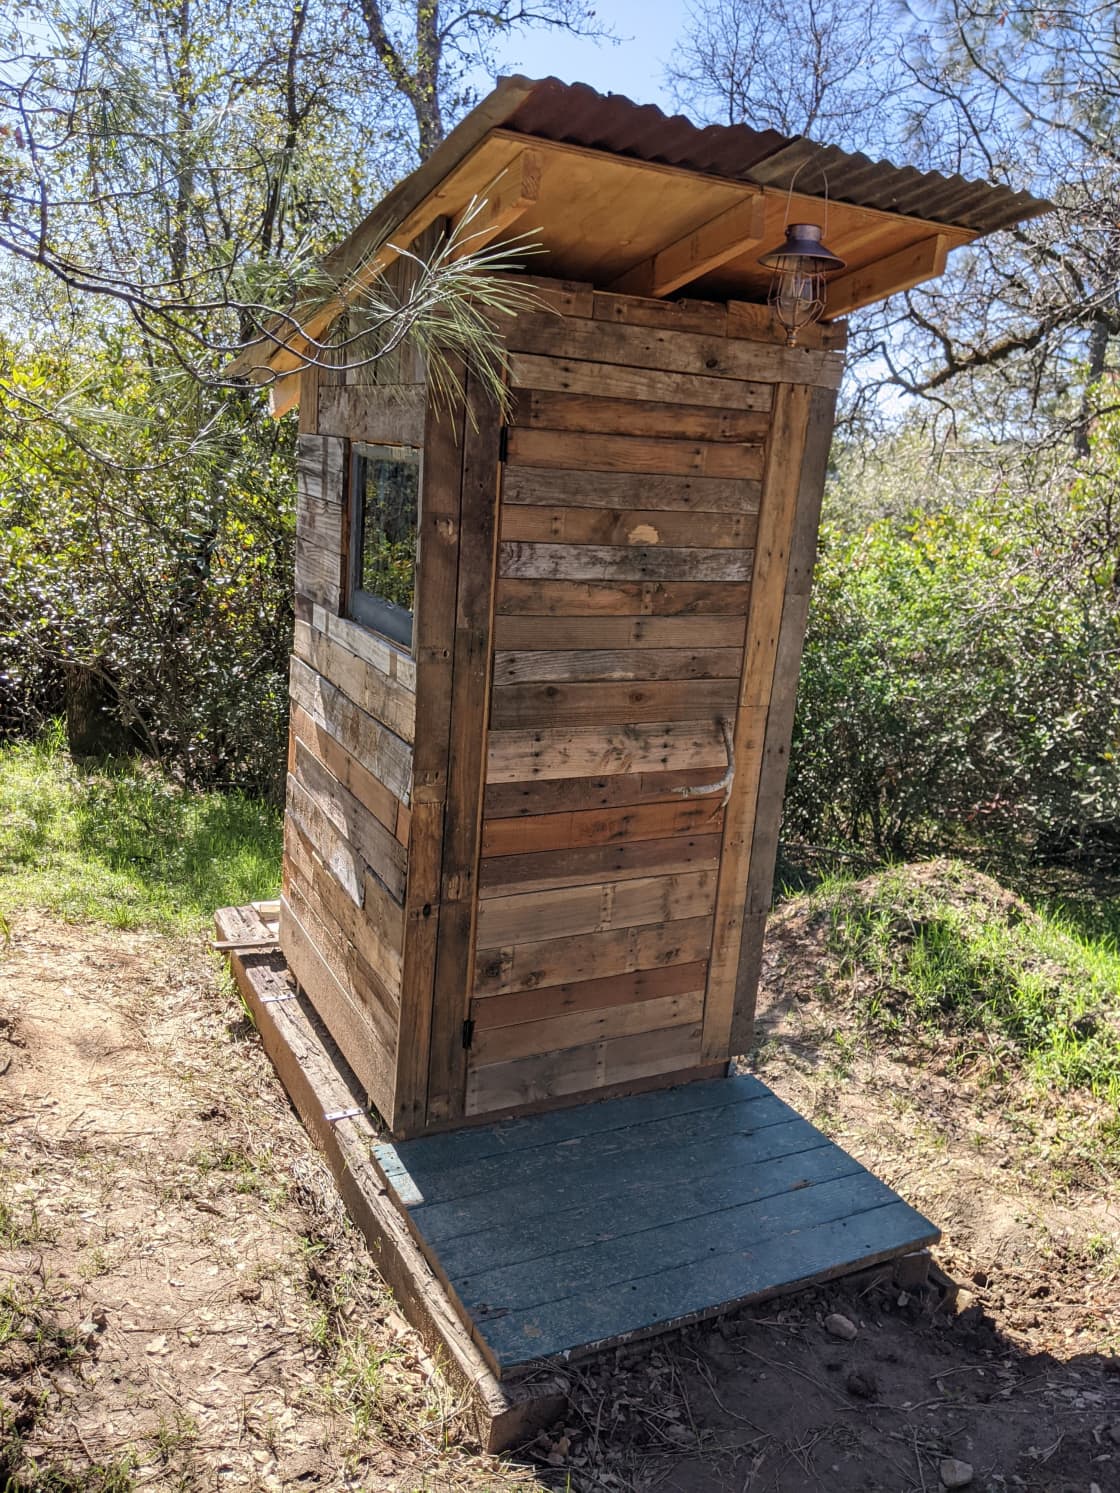 Brand new outhouse! Super clean and stylish!